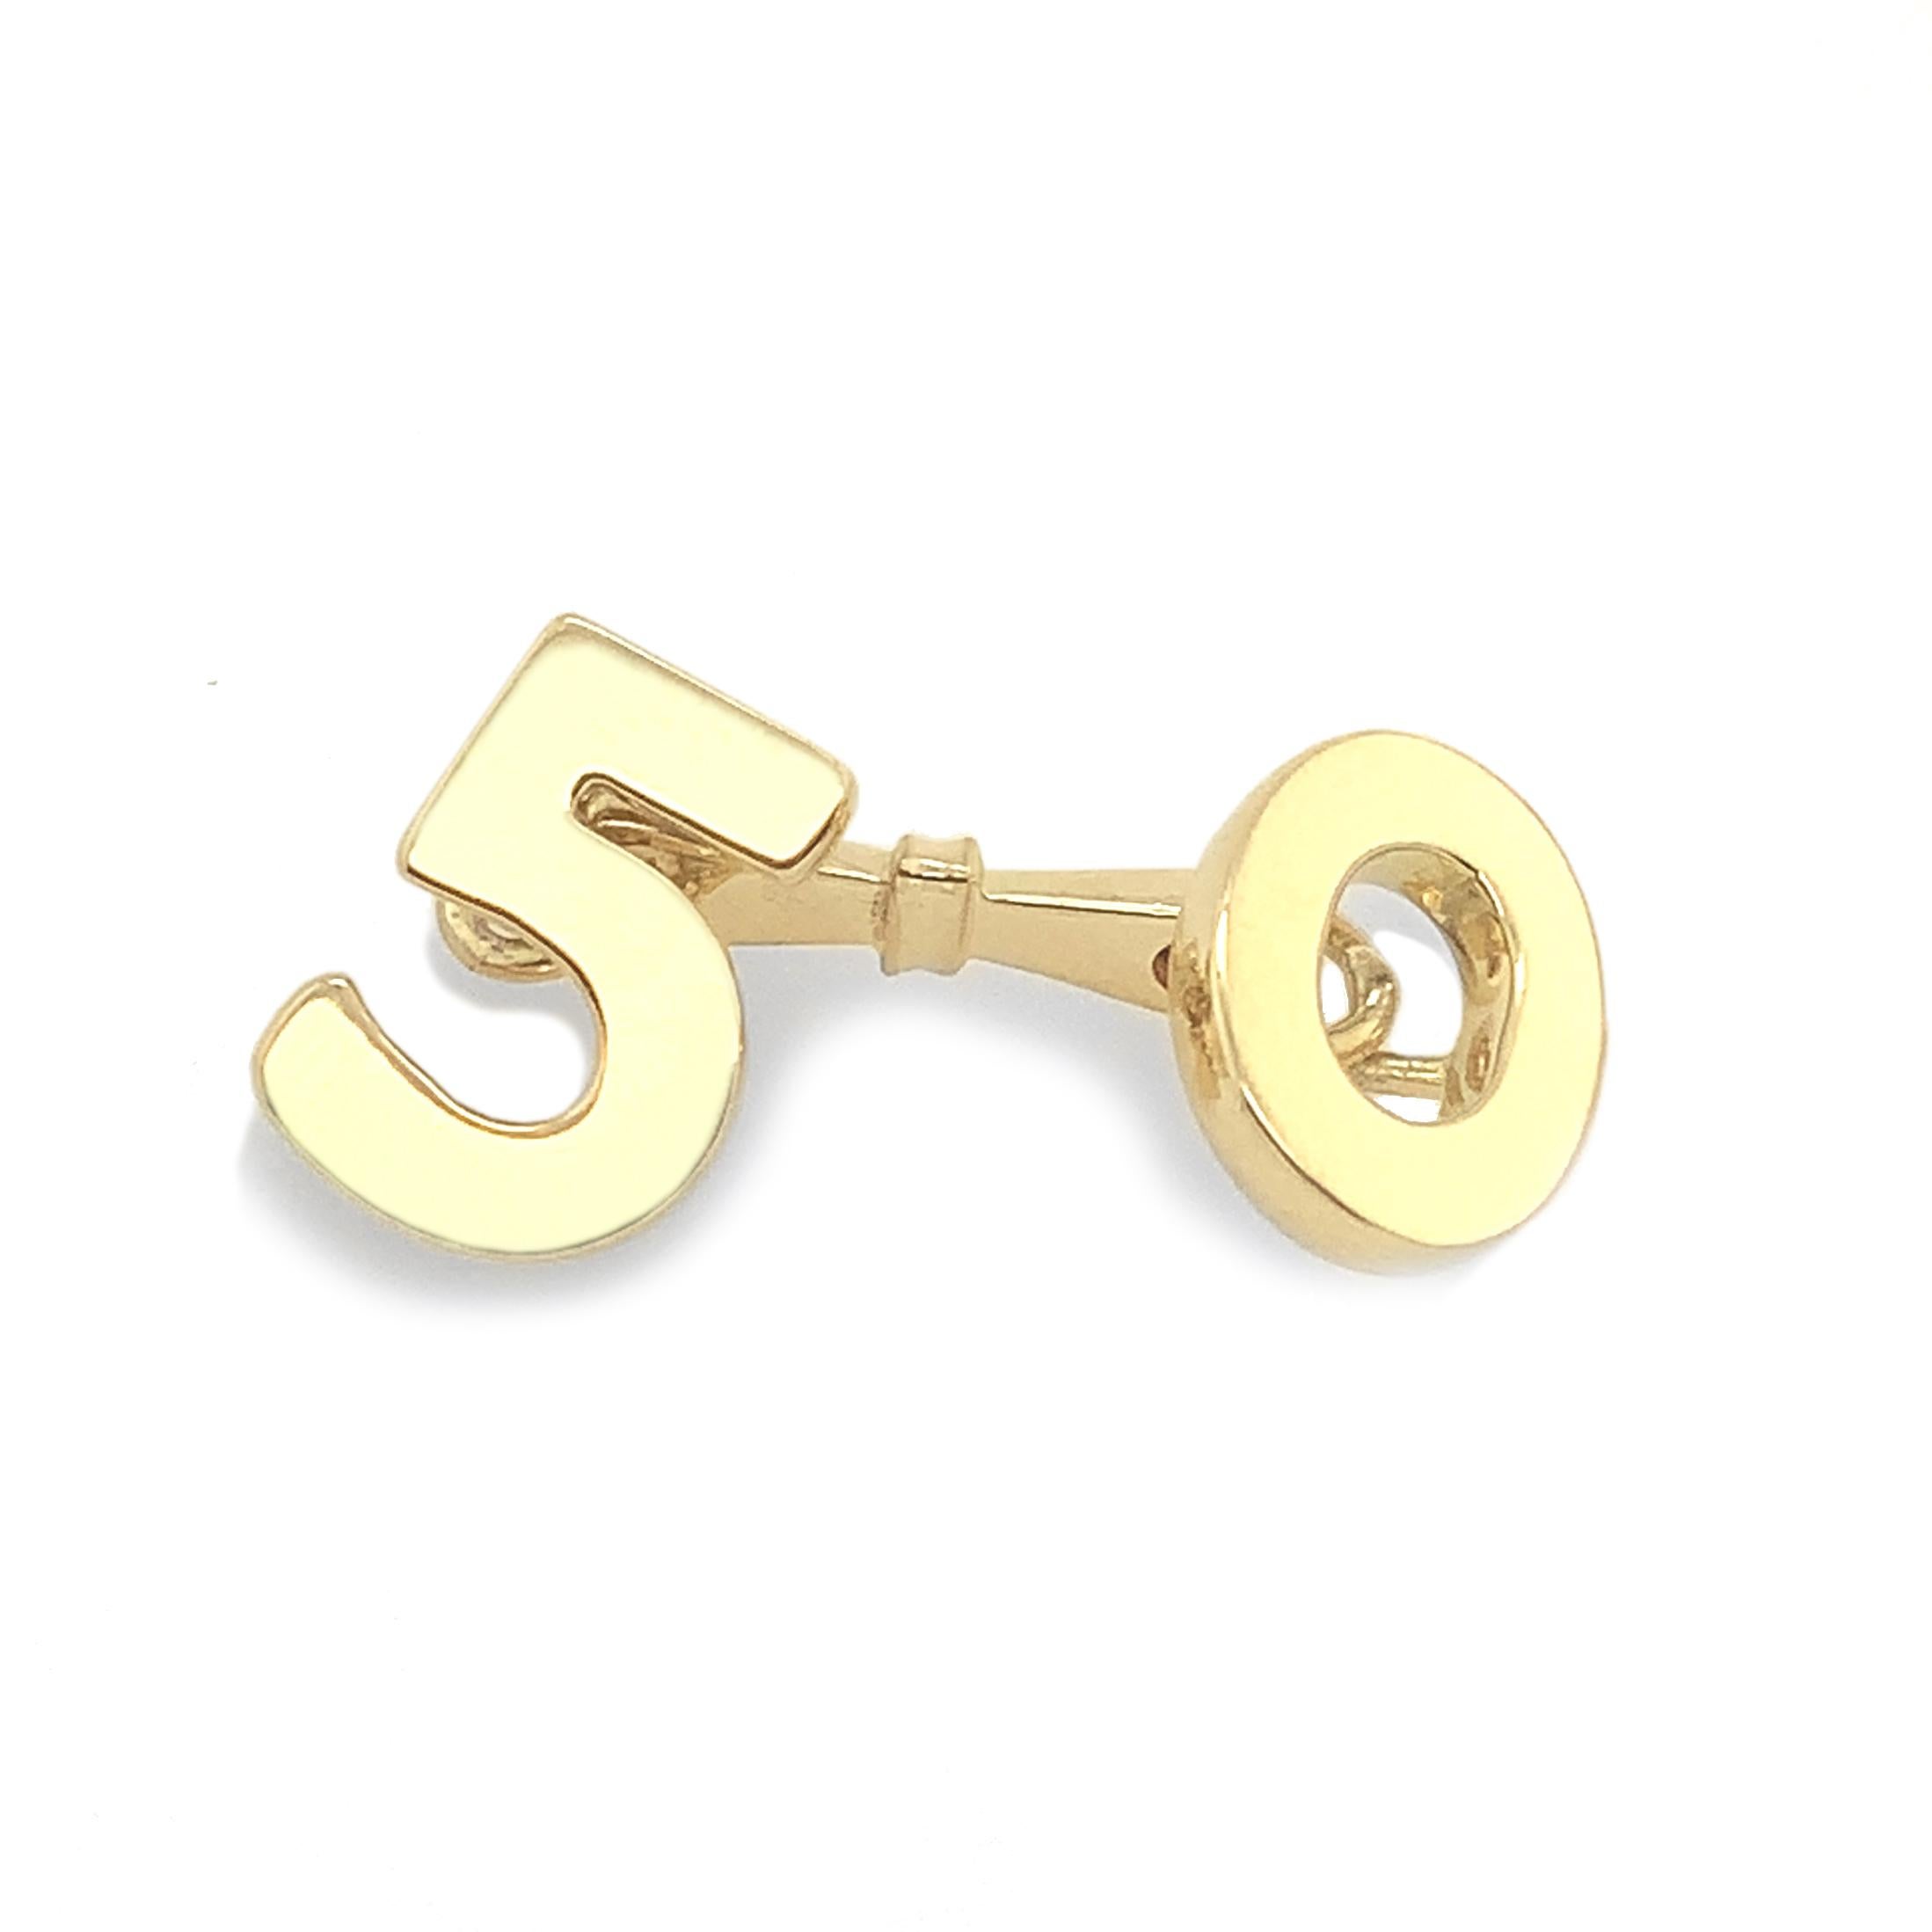 Sabbadini Gold 50/50 Cufflinks In Excellent Condition For Sale In New York, NY